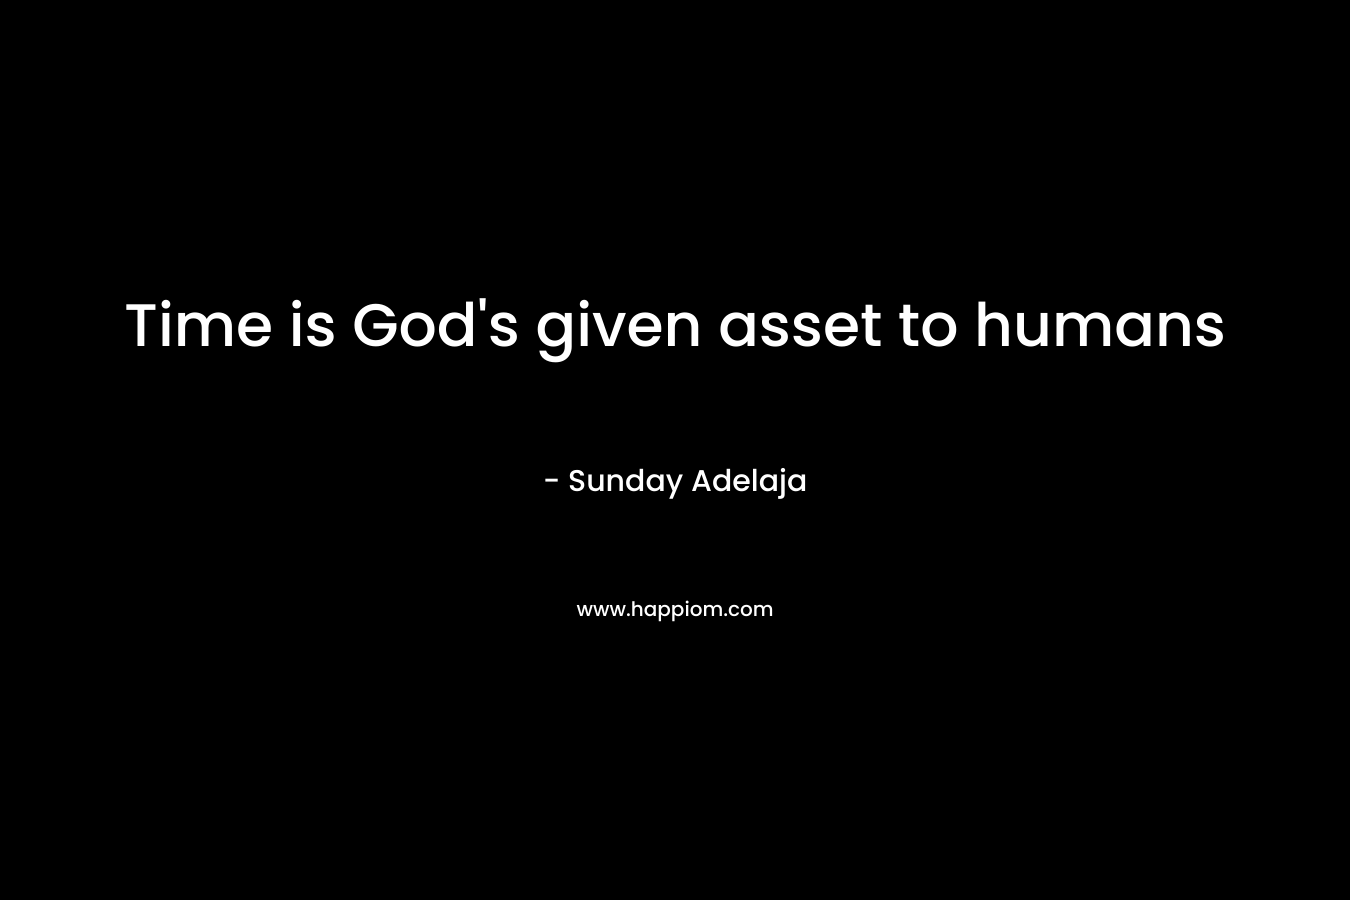 Time is God's given asset to humans